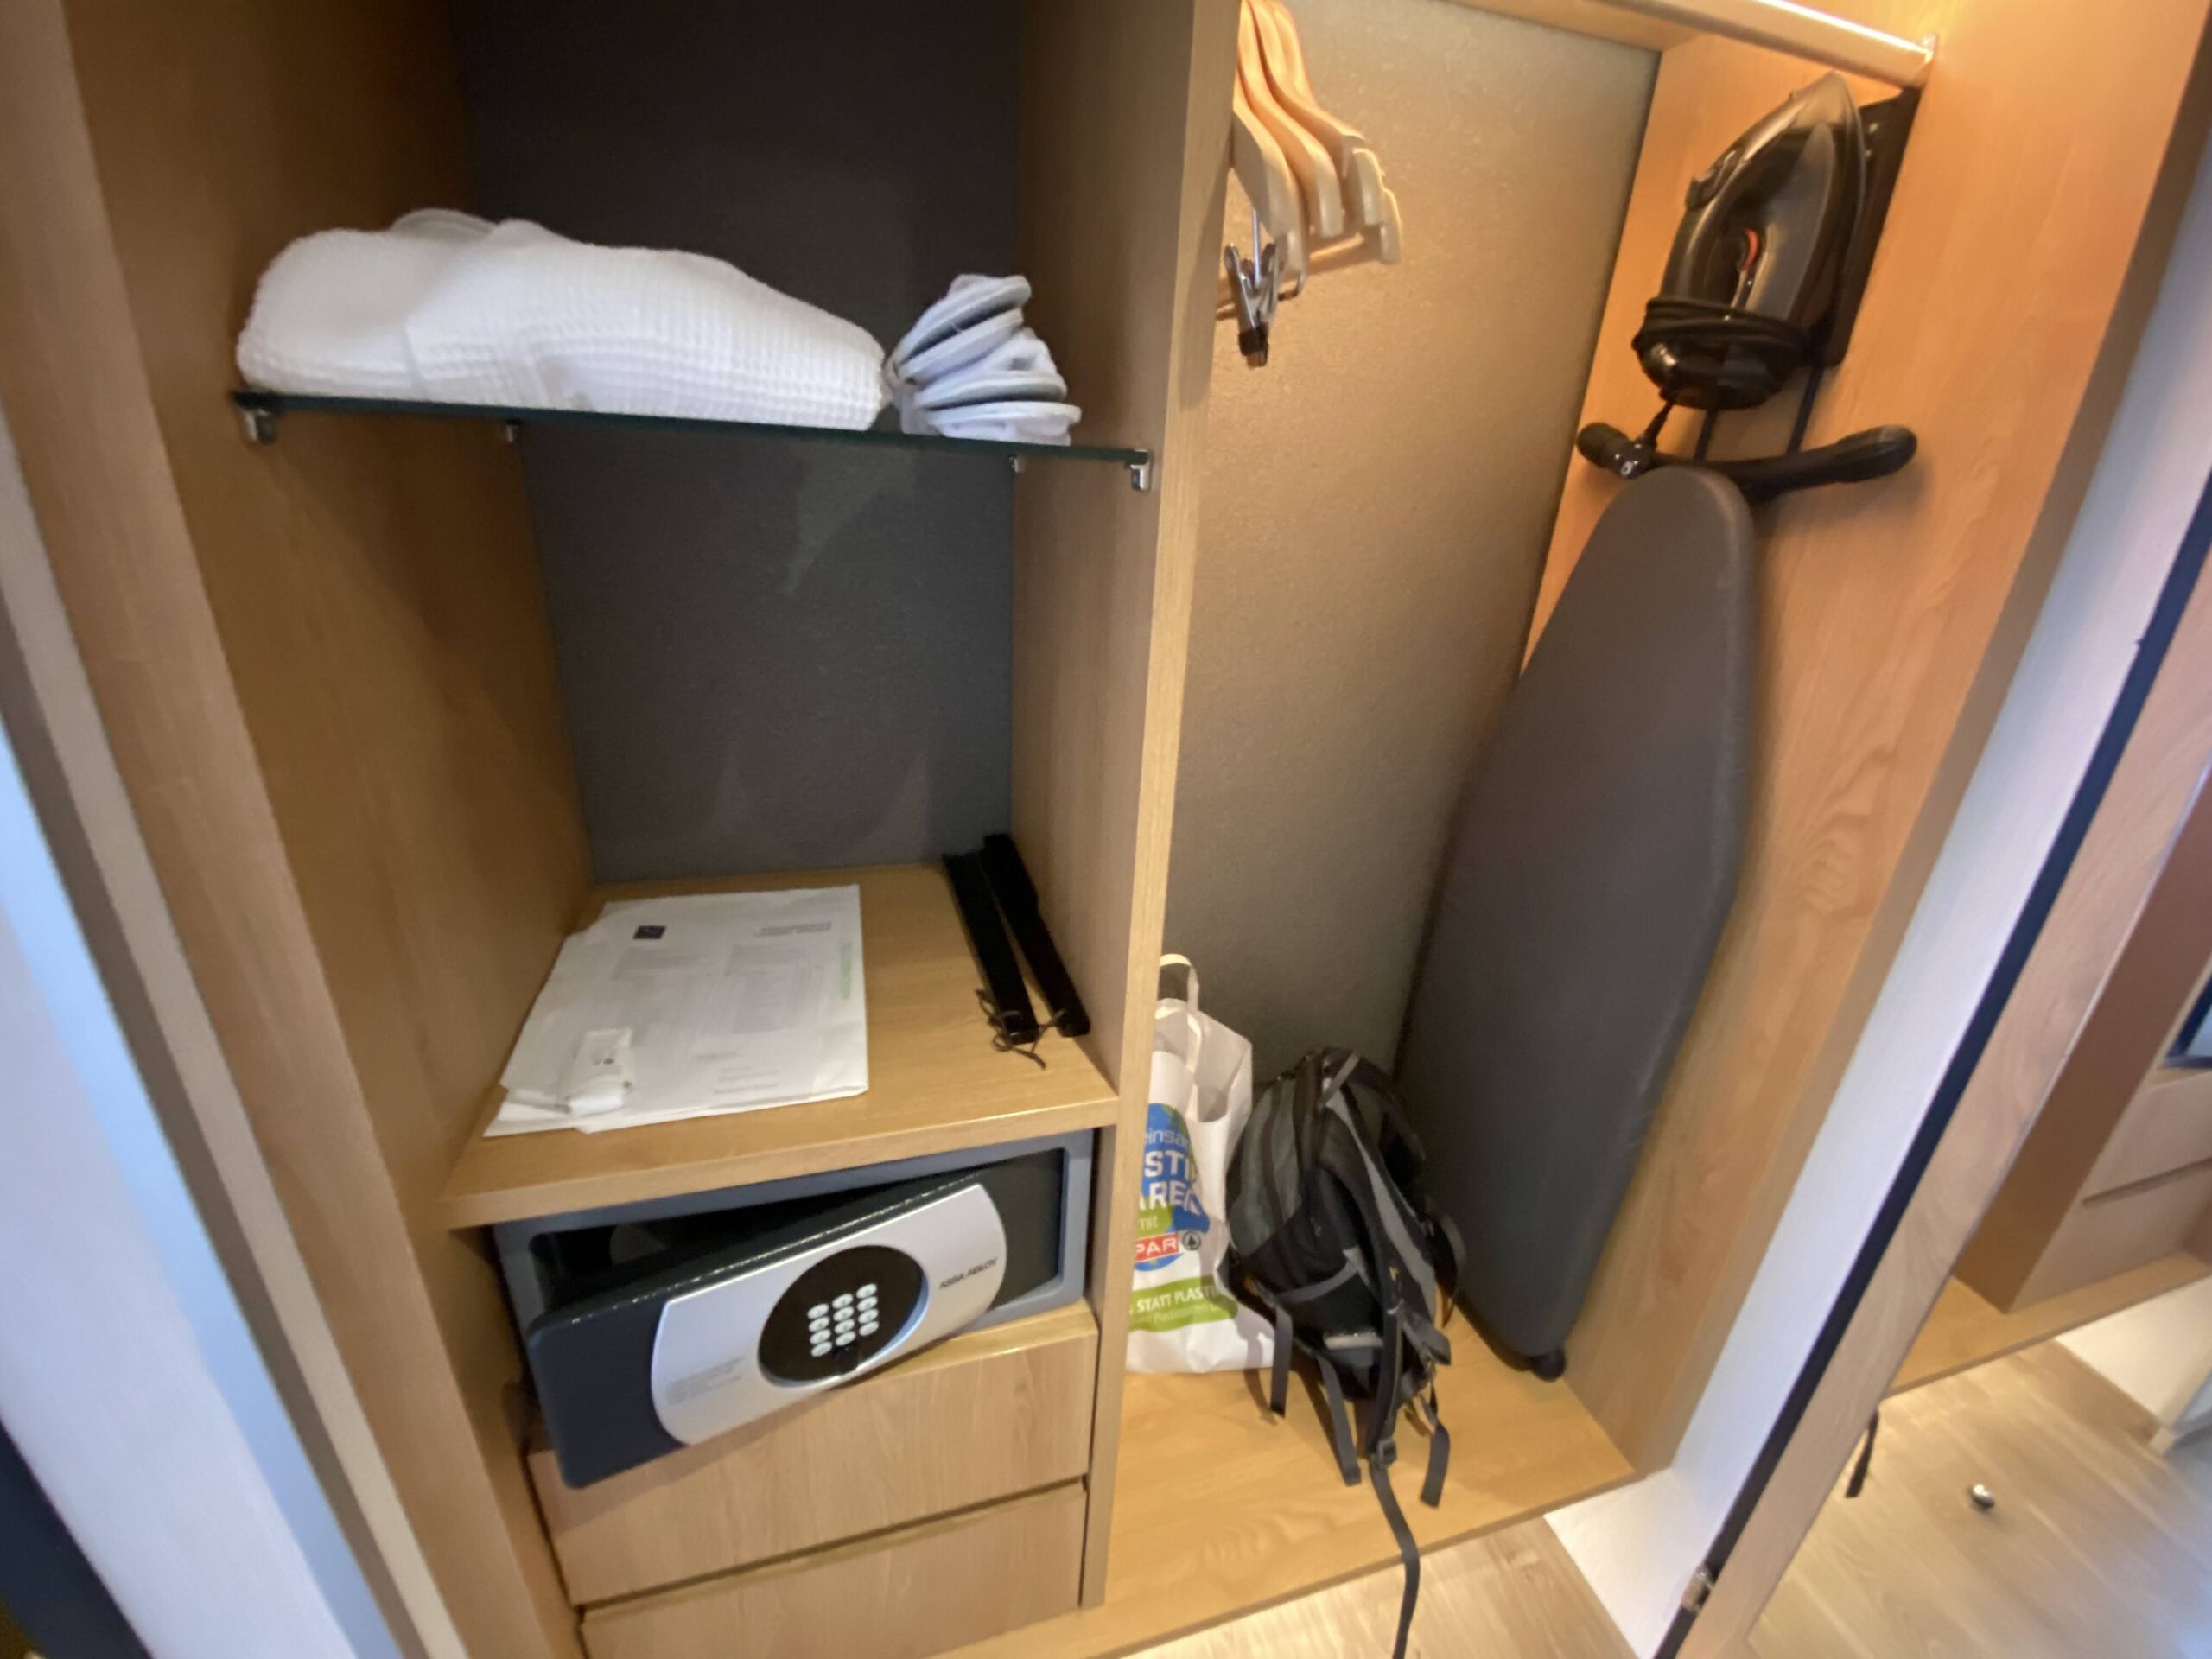 a closet with a ironing board and a small ironing board